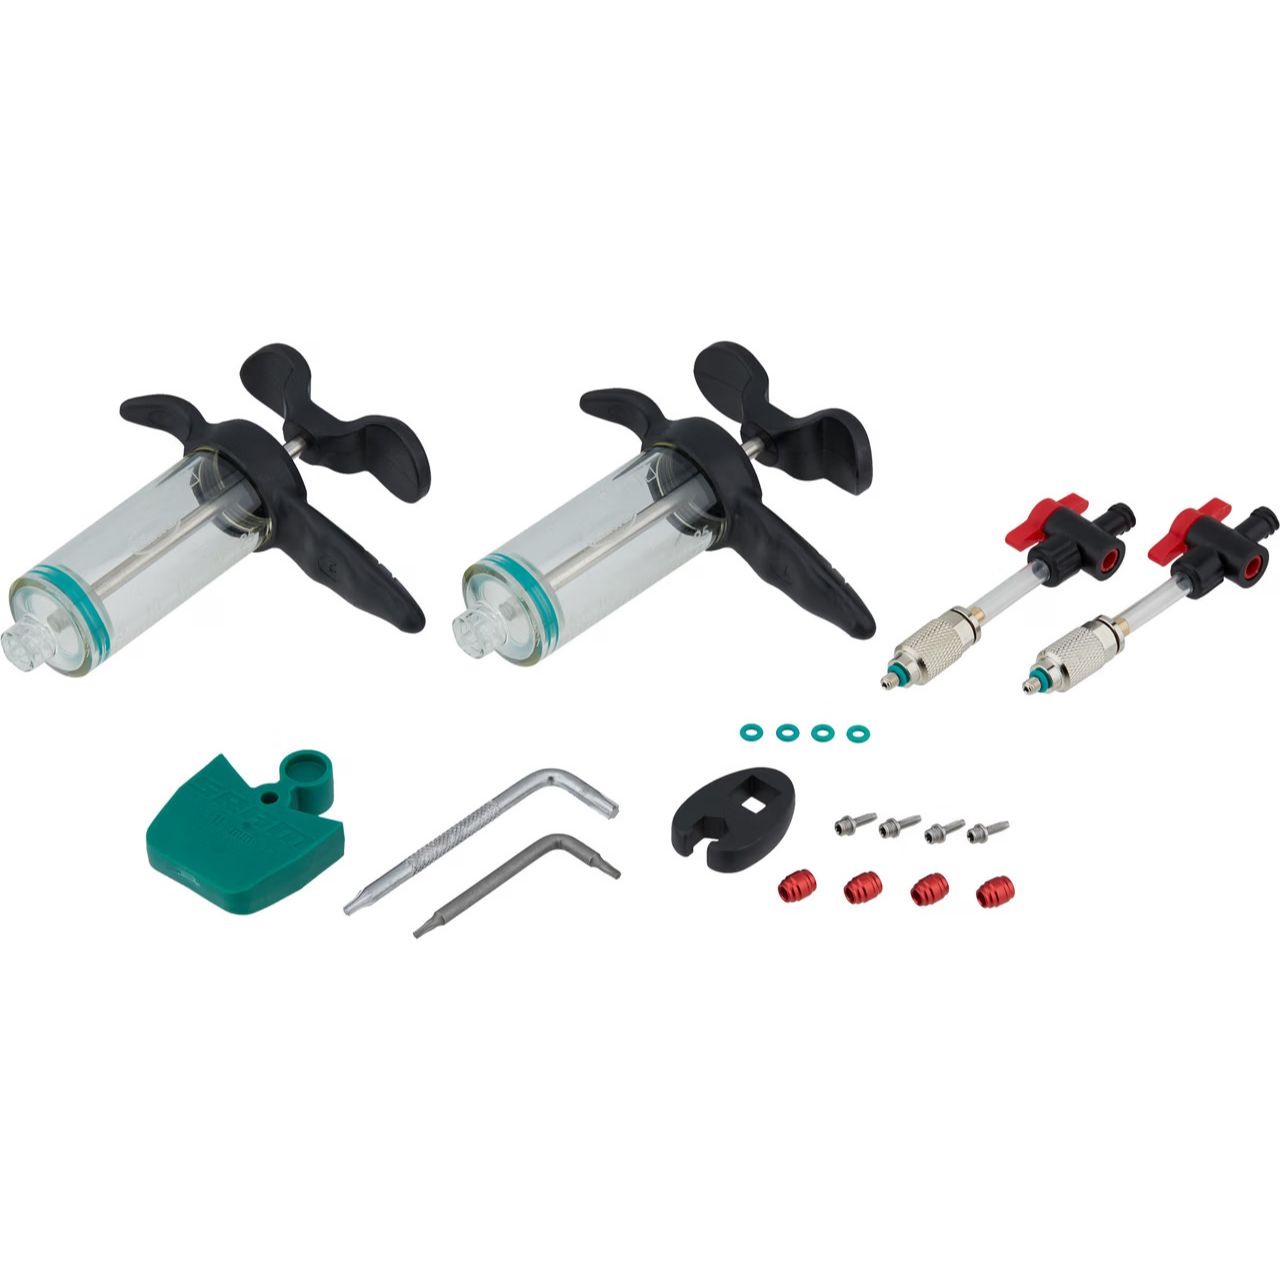 SRAM Pro Mineral Oil Bleed Kit - No Oil Included